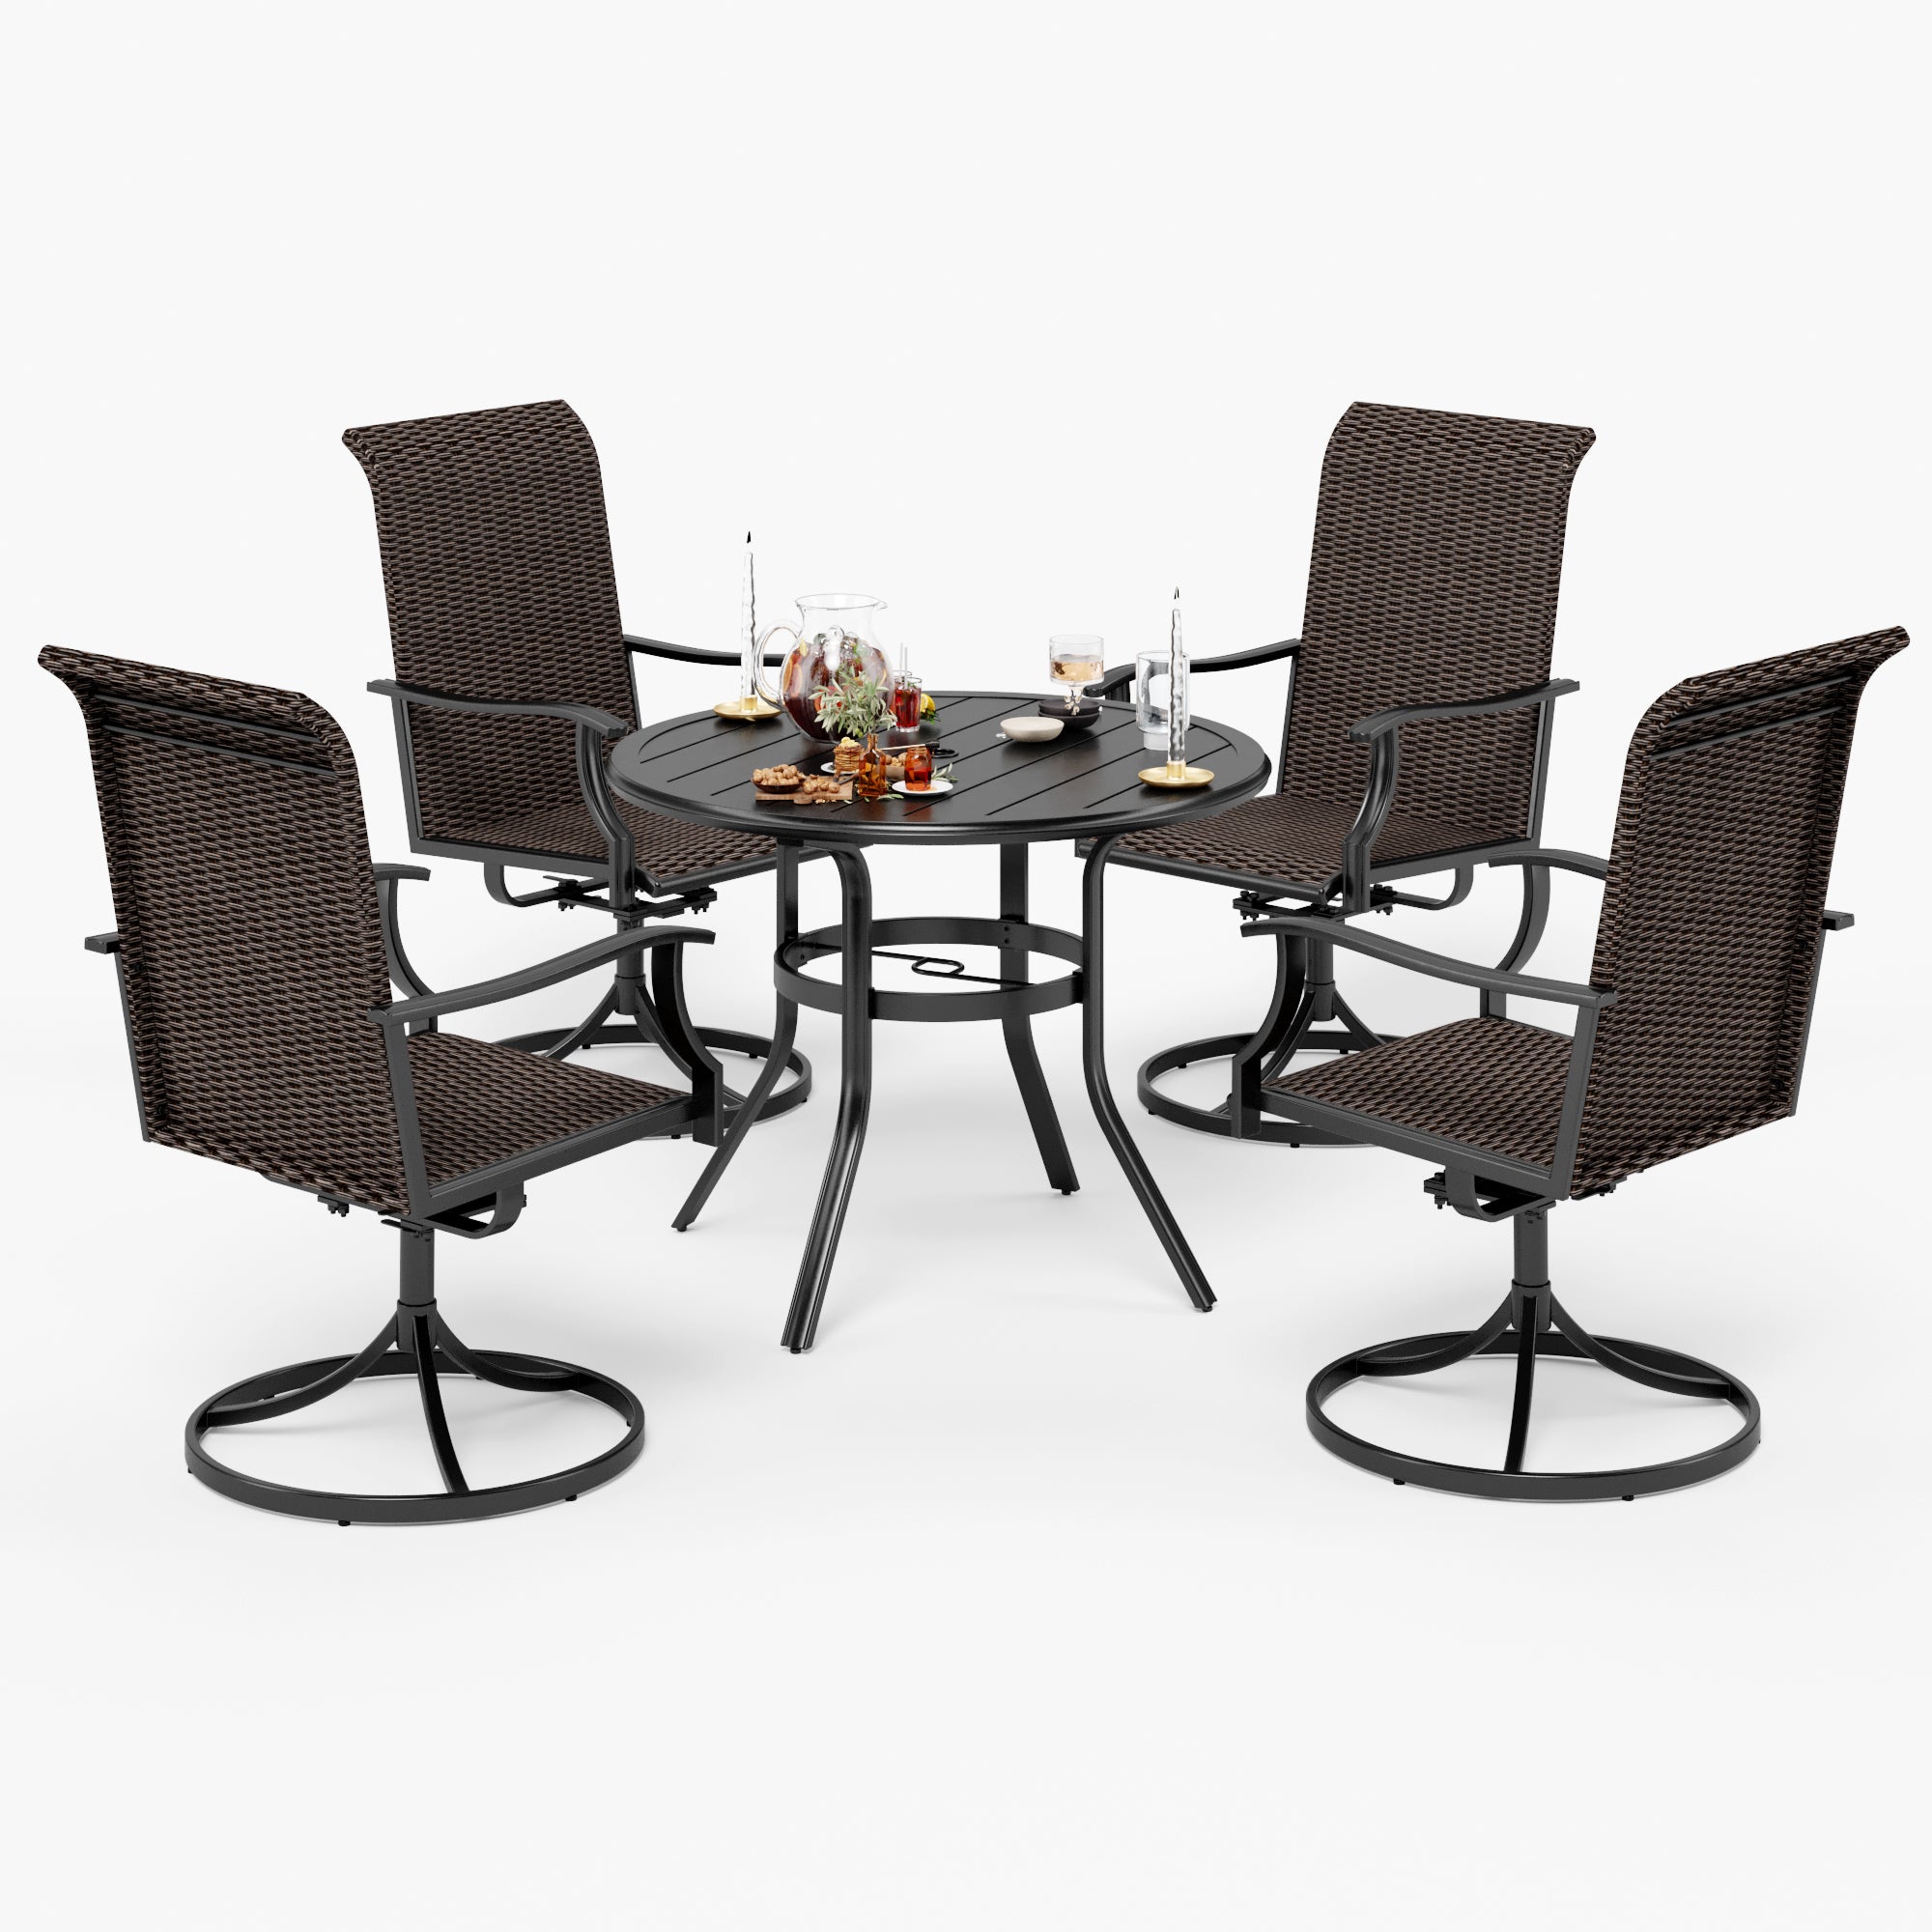 PHI VILLA Steel Round Table & 4 Rattan Swivel Chairs 5-Piece Outdoor Dining Set